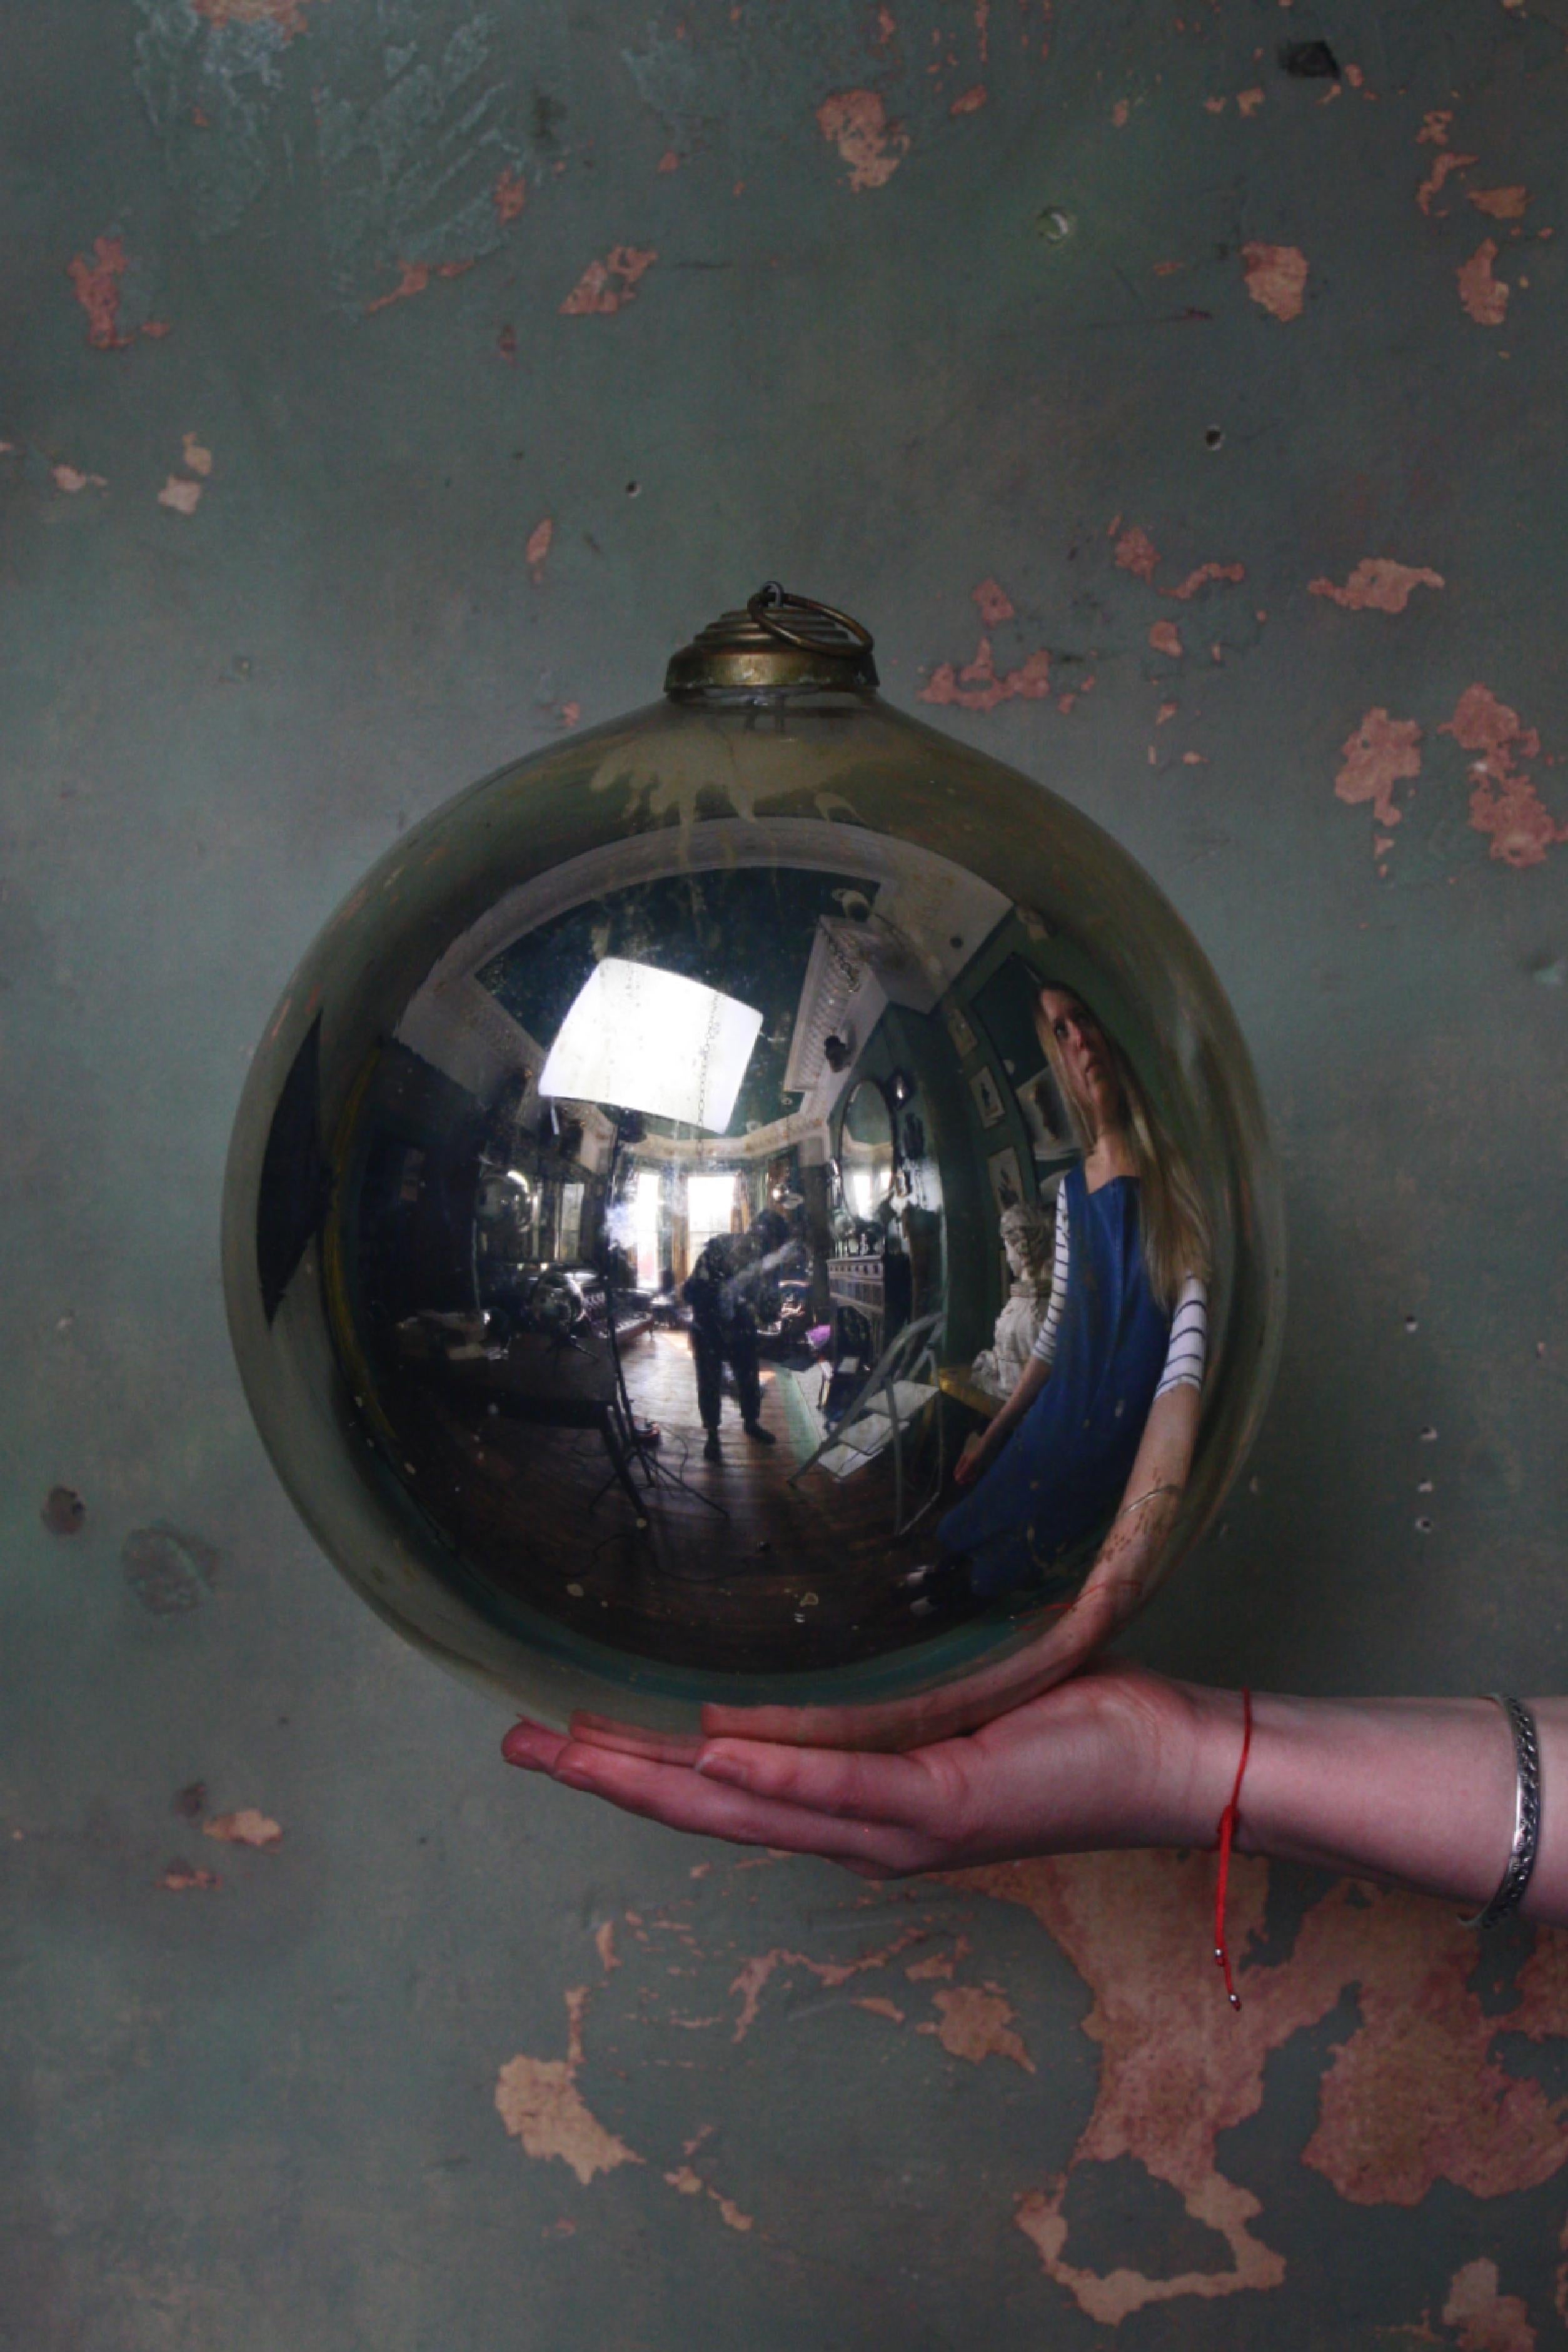 A large early 20th century ball, with age related pitting and oxidization with a pressed brass gallery, approximate measurements 26cm in diameter, 32cm in drop, 81cm in circumference.